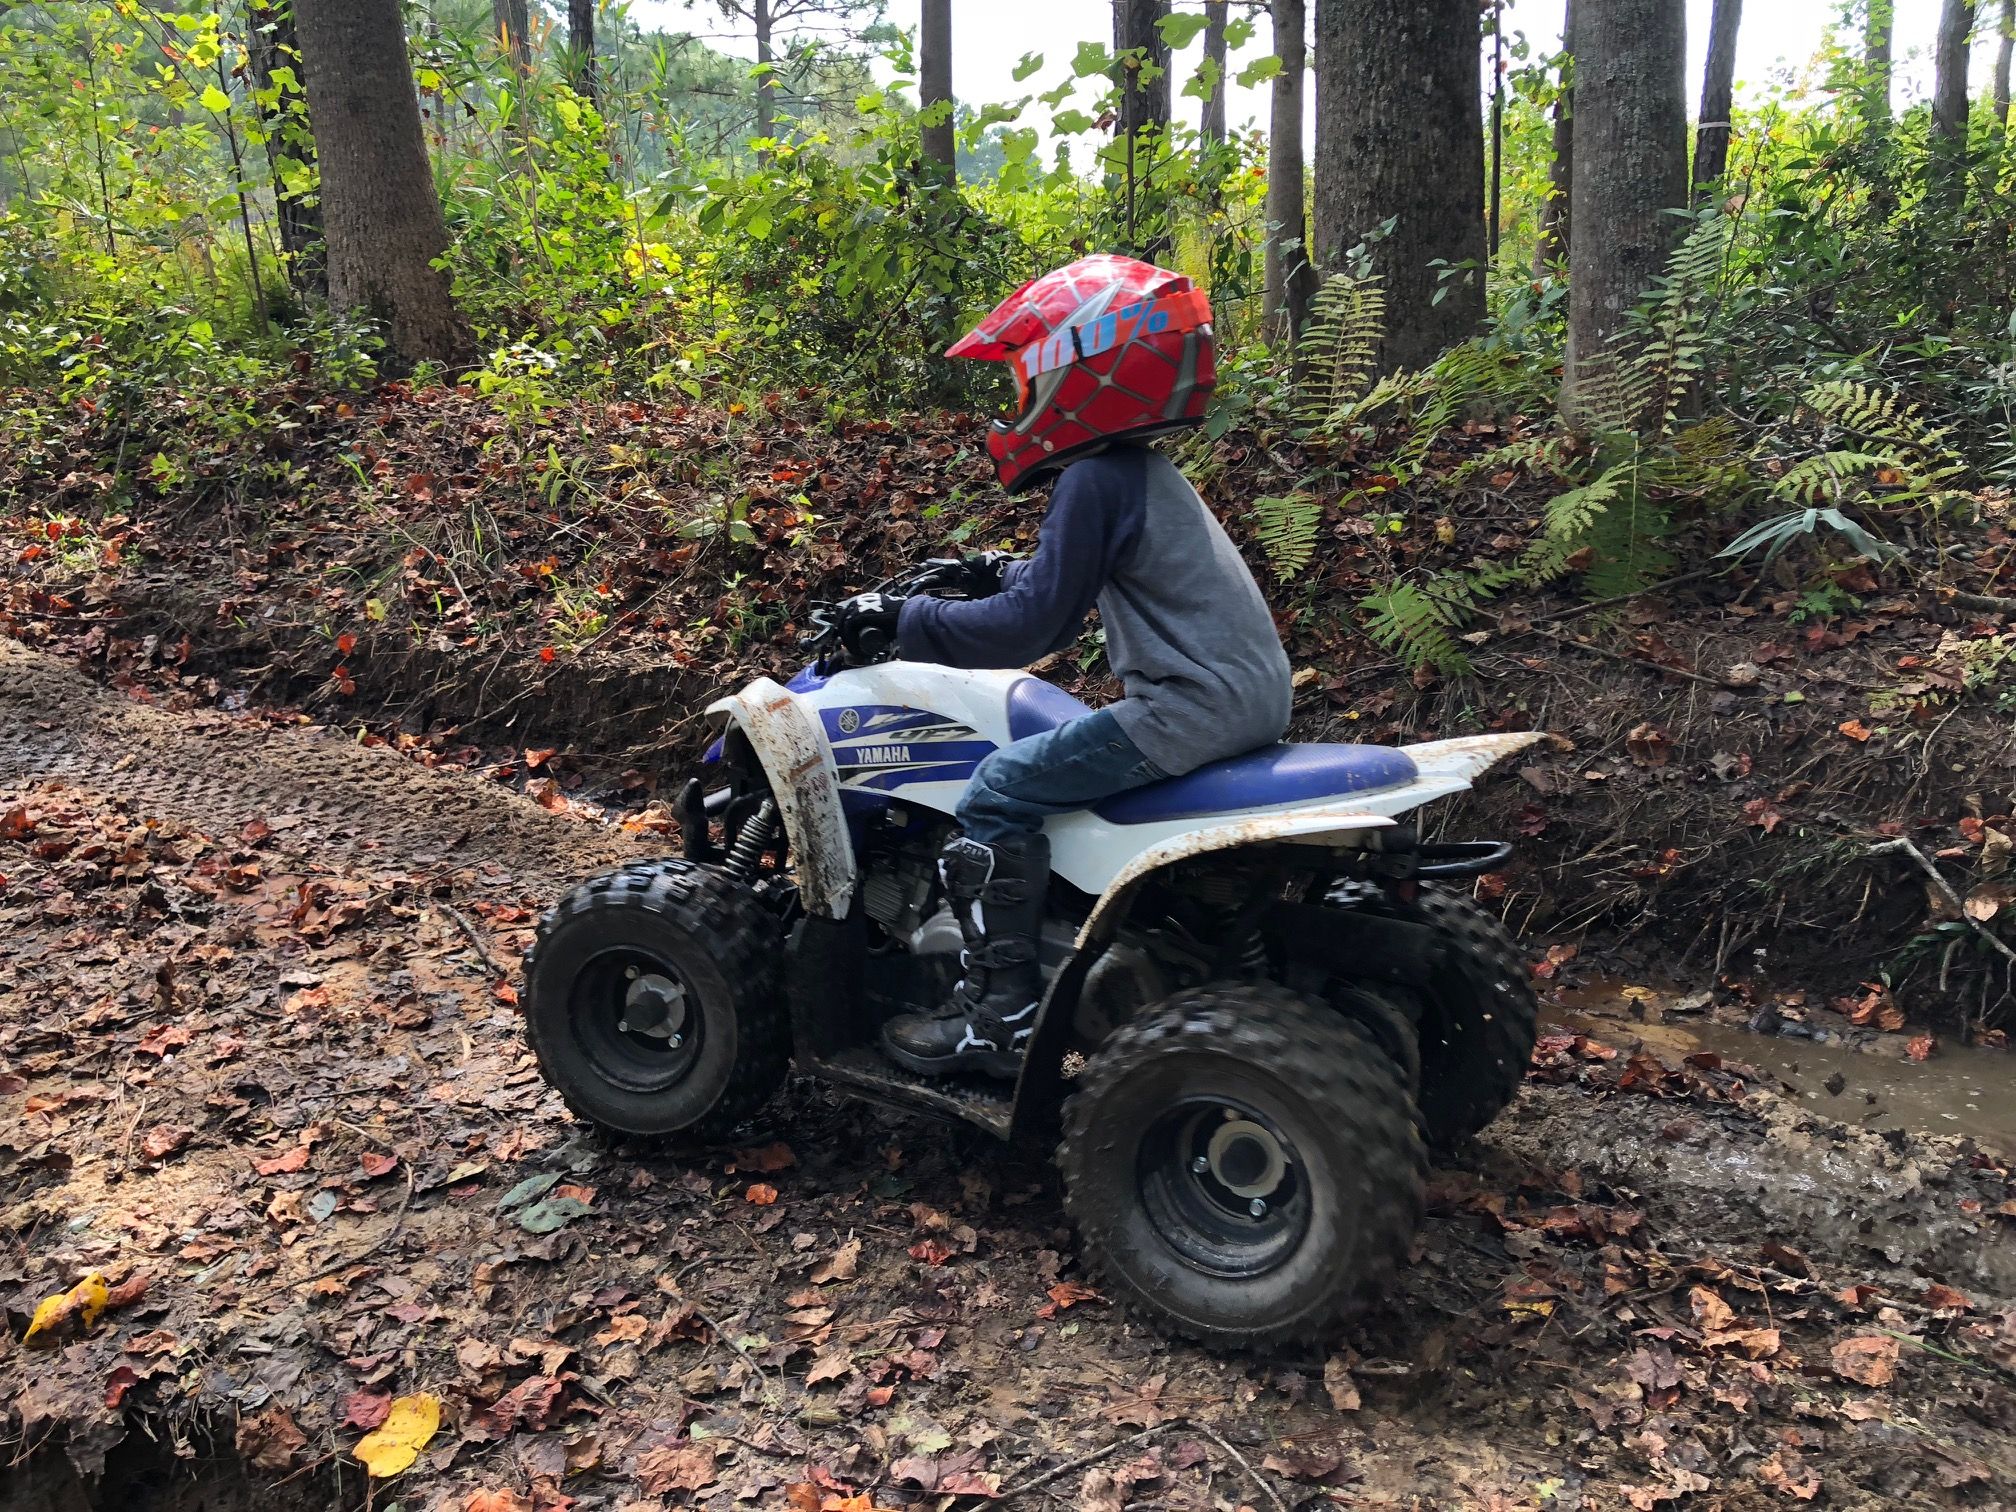 ride on four wheelers for toddlers